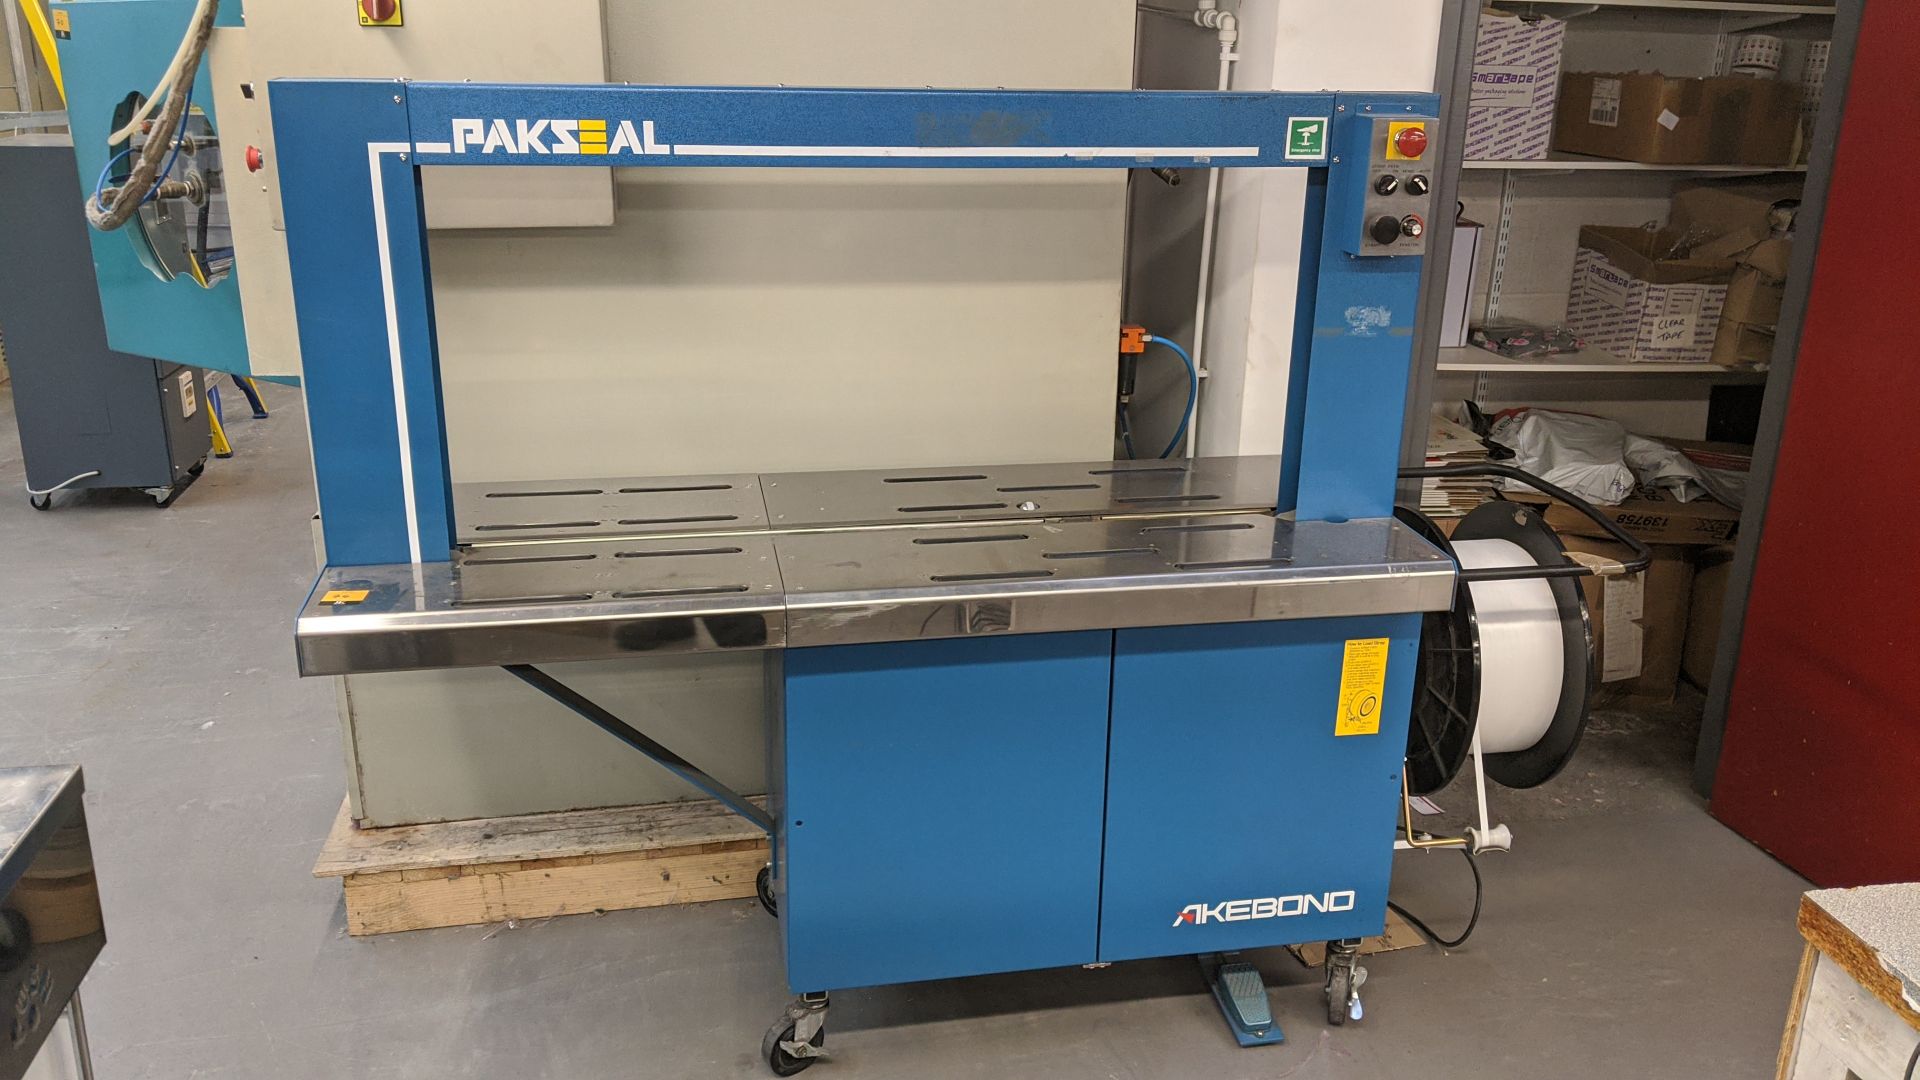 Pakseal Akebond large mobile automatic electric strapping/banding machine, model SX510, machine - Image 3 of 13